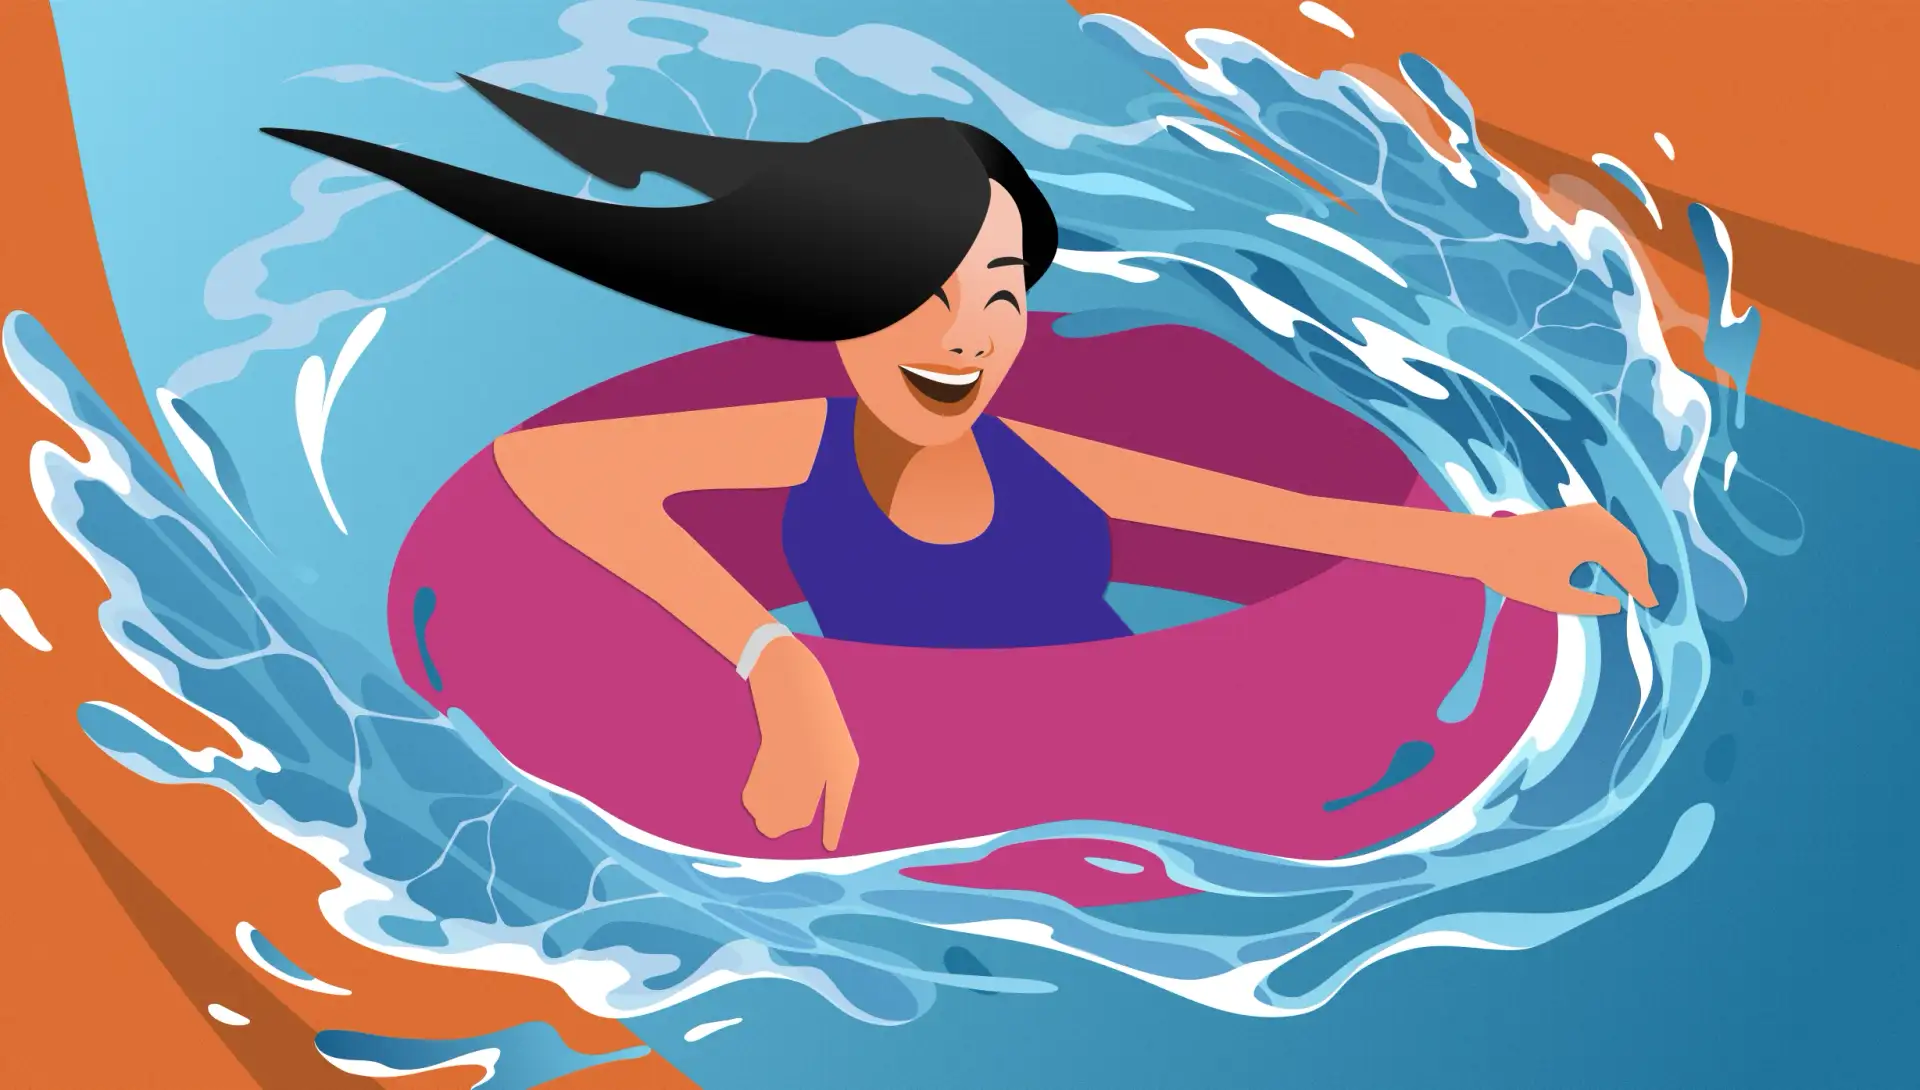 Person smiles as they splash down a water slide in an inflatable tube